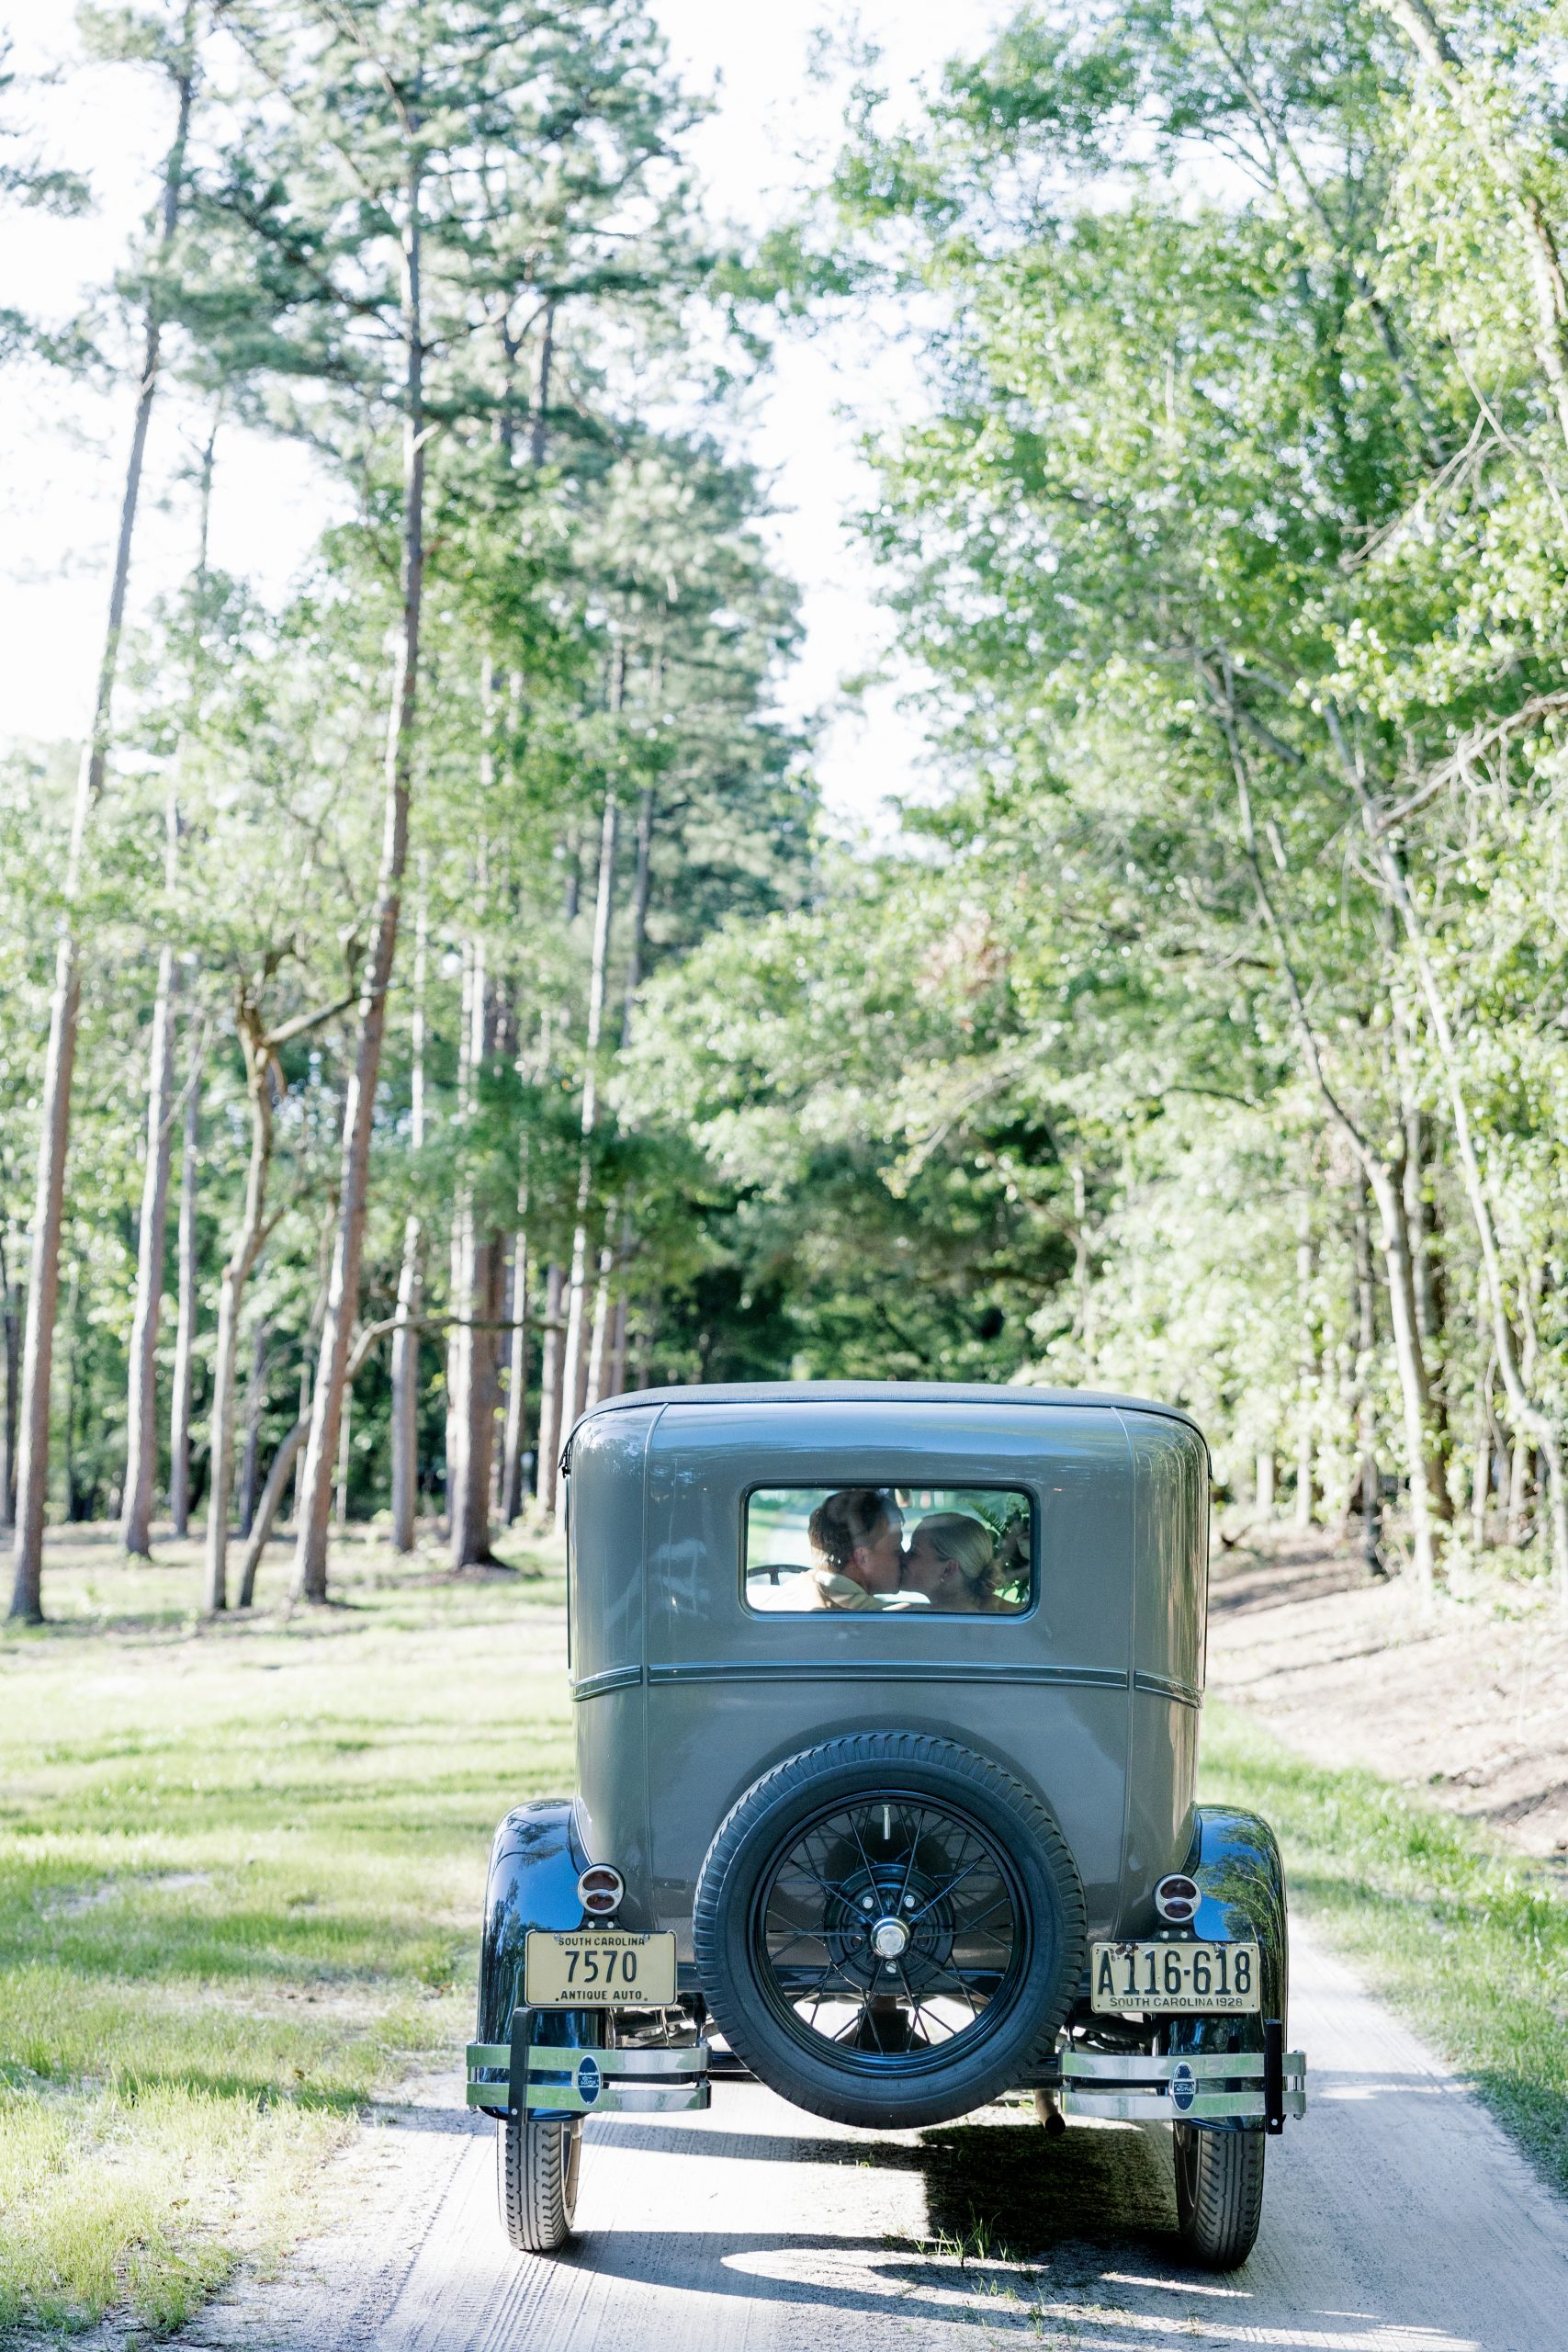 Blake and Bennett left the church and rode to the reception at the Relief Farm in a 1928 Model A Ford, lovingly called “Miss A” by the family. Blake’s grandfather’s grandmother originally purchased it in 1928. 